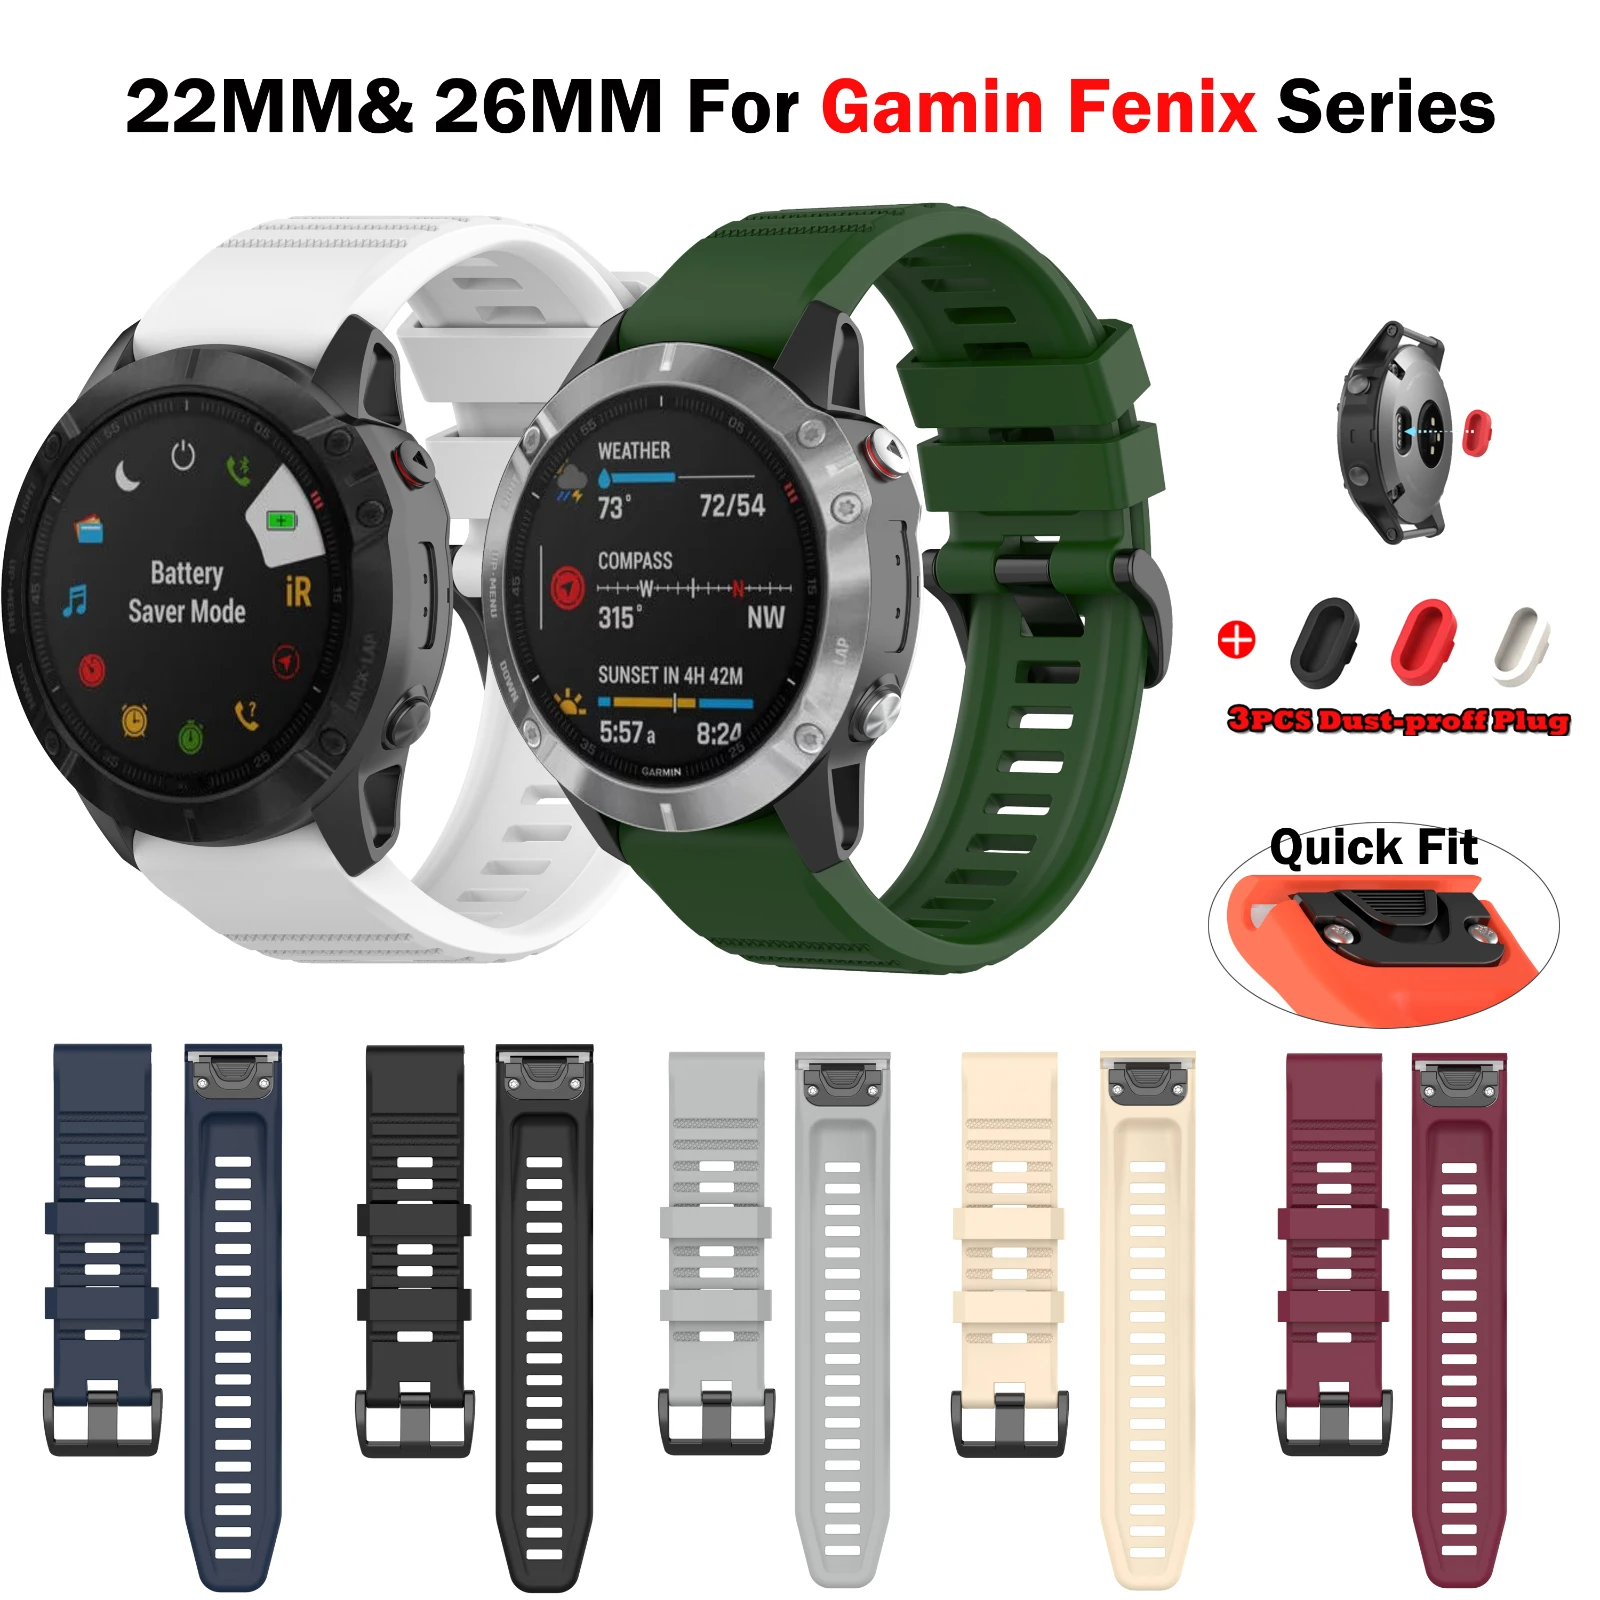 

26mm 22mm Silicone Watchband Wriststrap Strap For Garmin Fenix 6X 6 6S Pro 5X 5 5S Plus 3 3HR Easy Fit Quick Release Wirstband